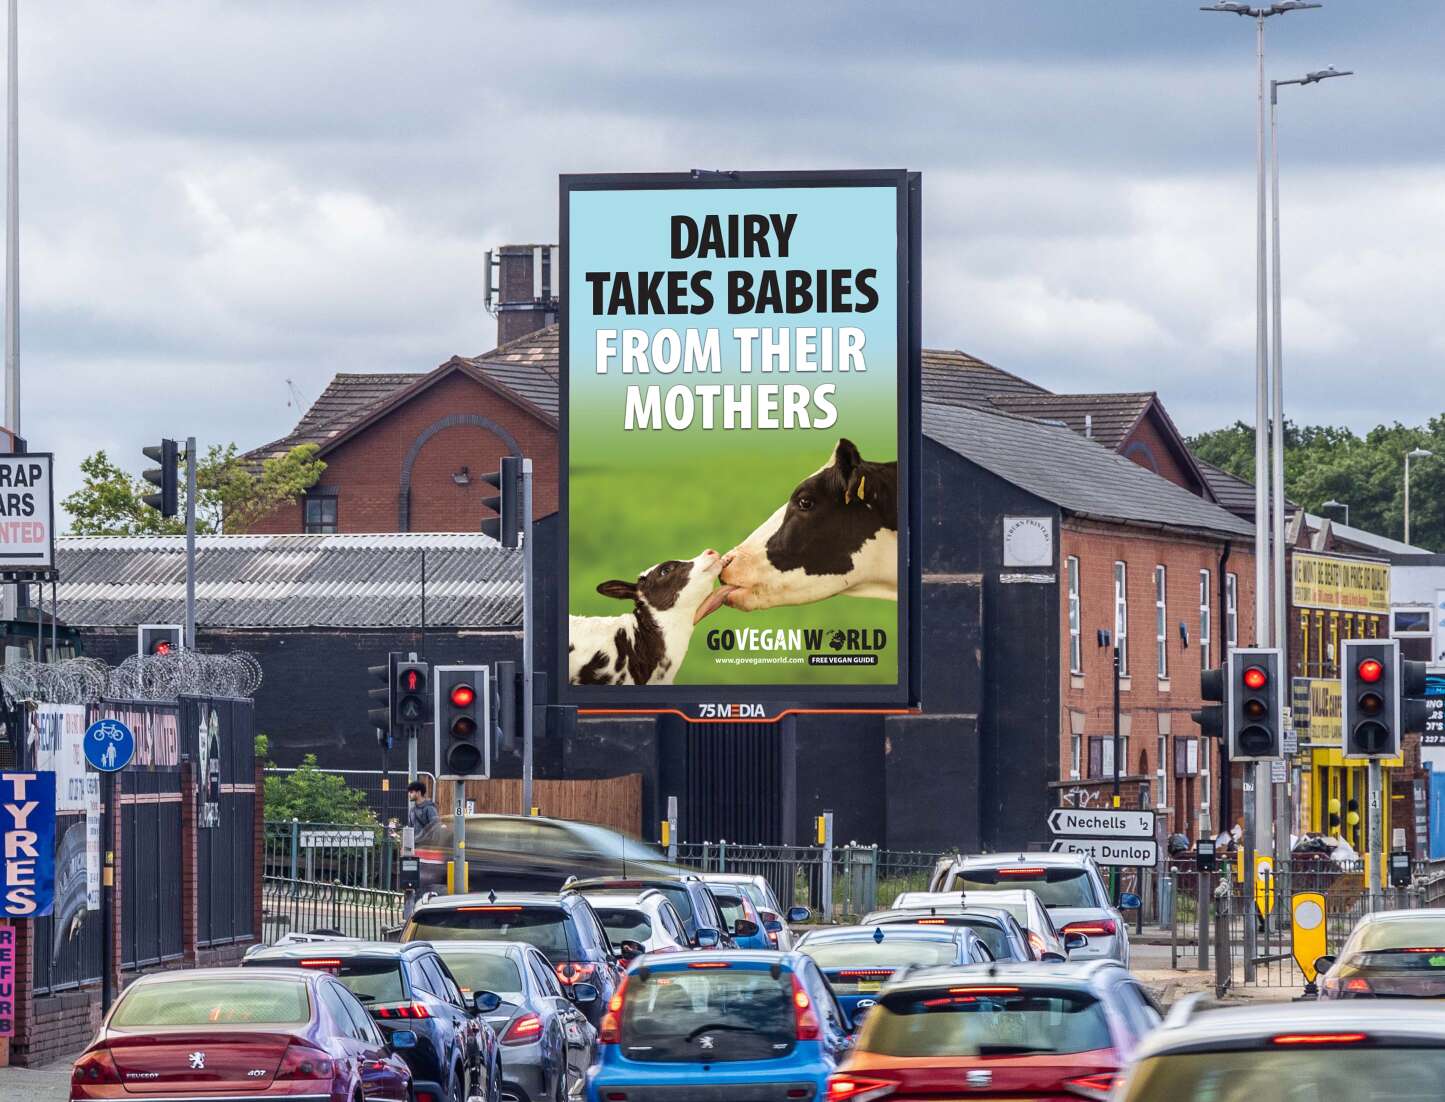 Dairy takes babies from their mothers